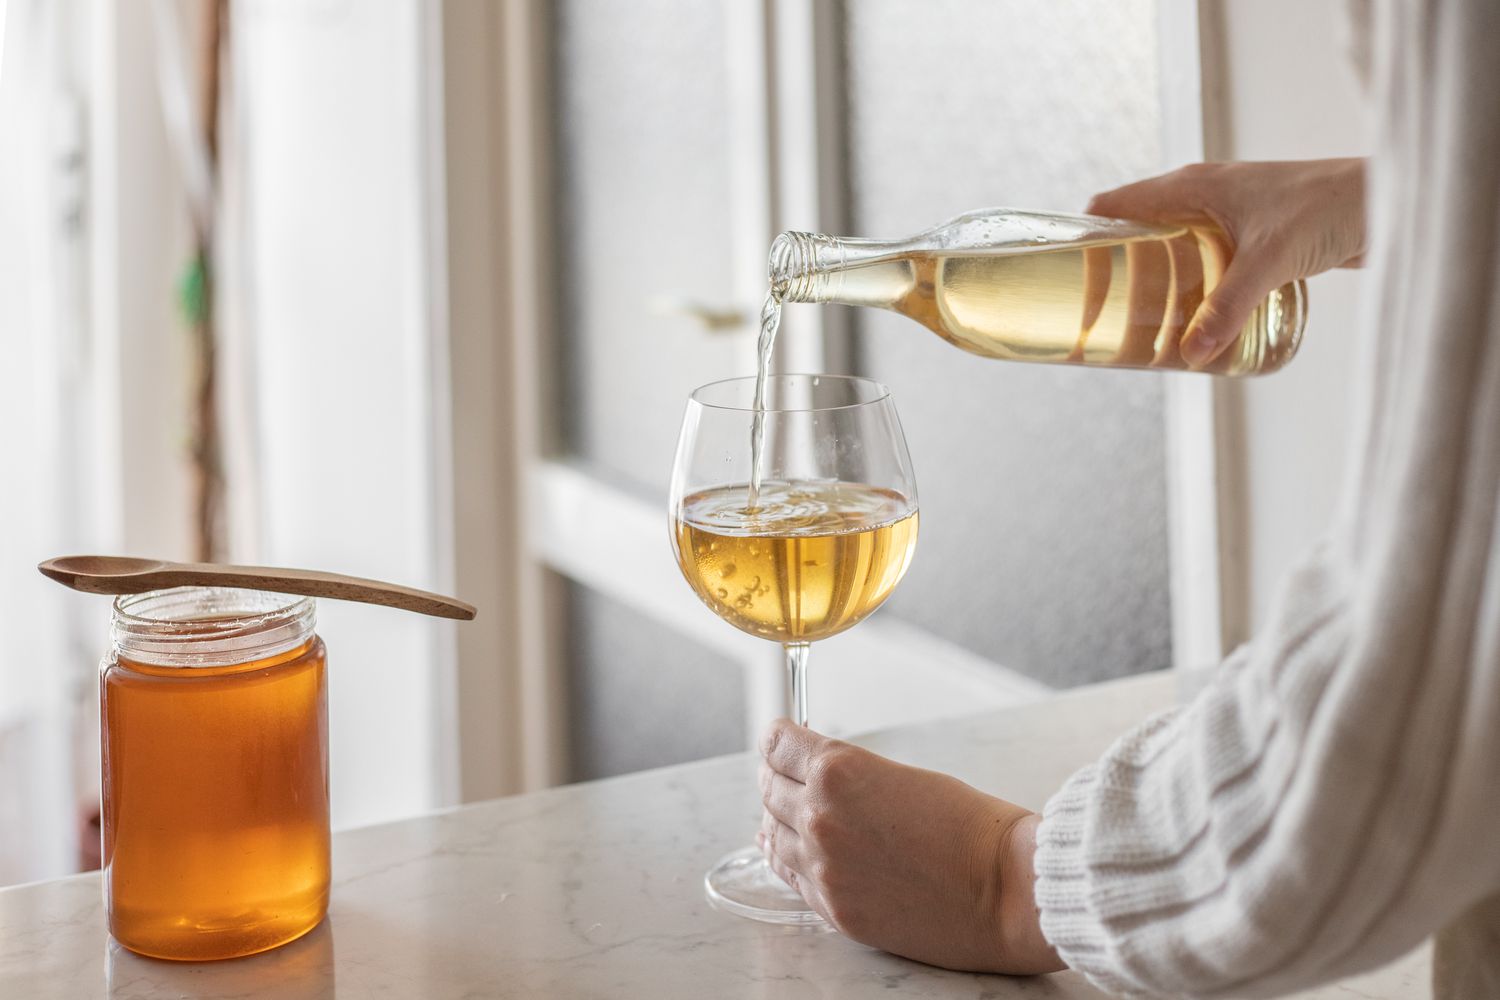 A glass of rich amber honey wine, exemplifying the traditional and natural essence of the beverage, symbolizing the focus keyword 'honey wine'.